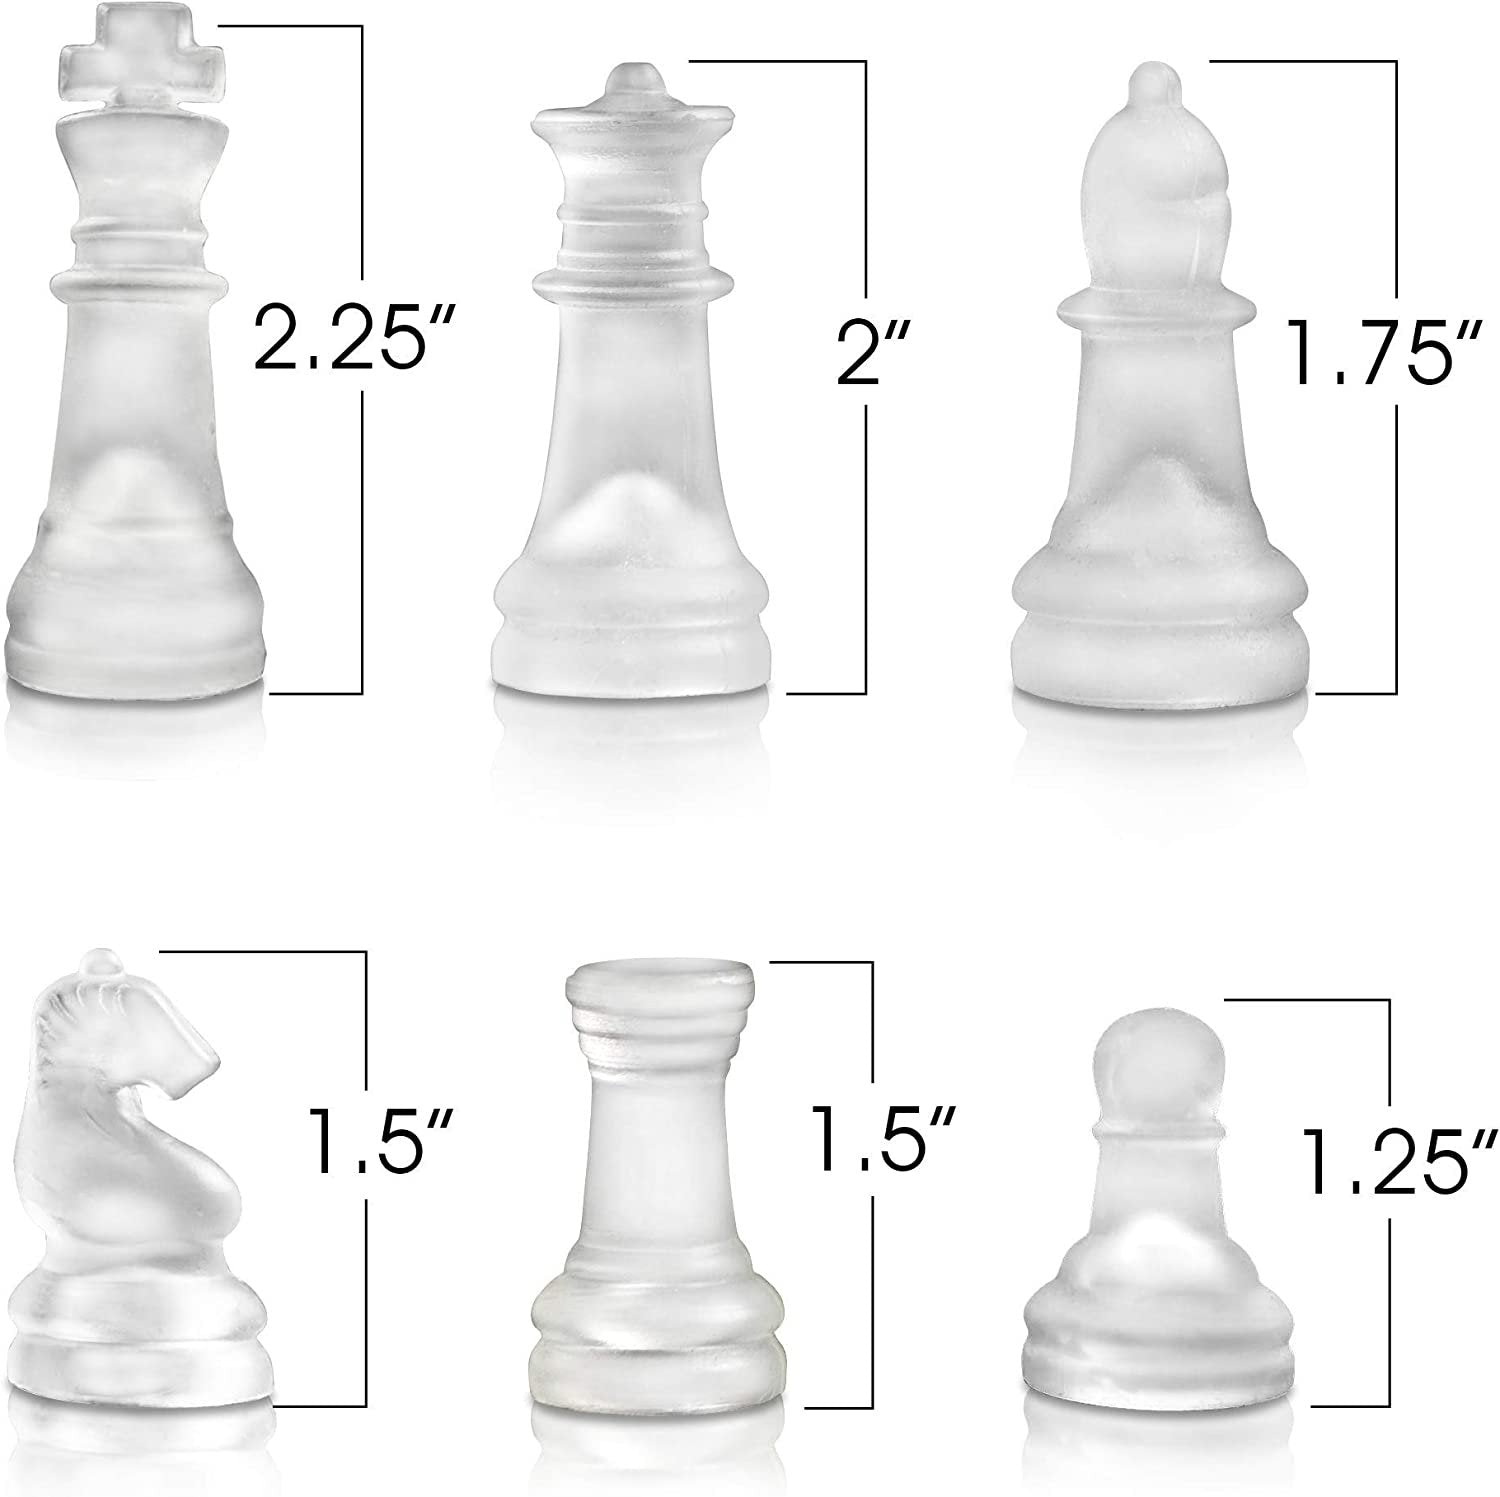 Gamie Glass Chess Set, Elegant Design - Durable Build - Fully Functional - 32 Frosted and Clear Pieces - Felted Bottoms - Easy to Carry - Reassuringly Stable (10")